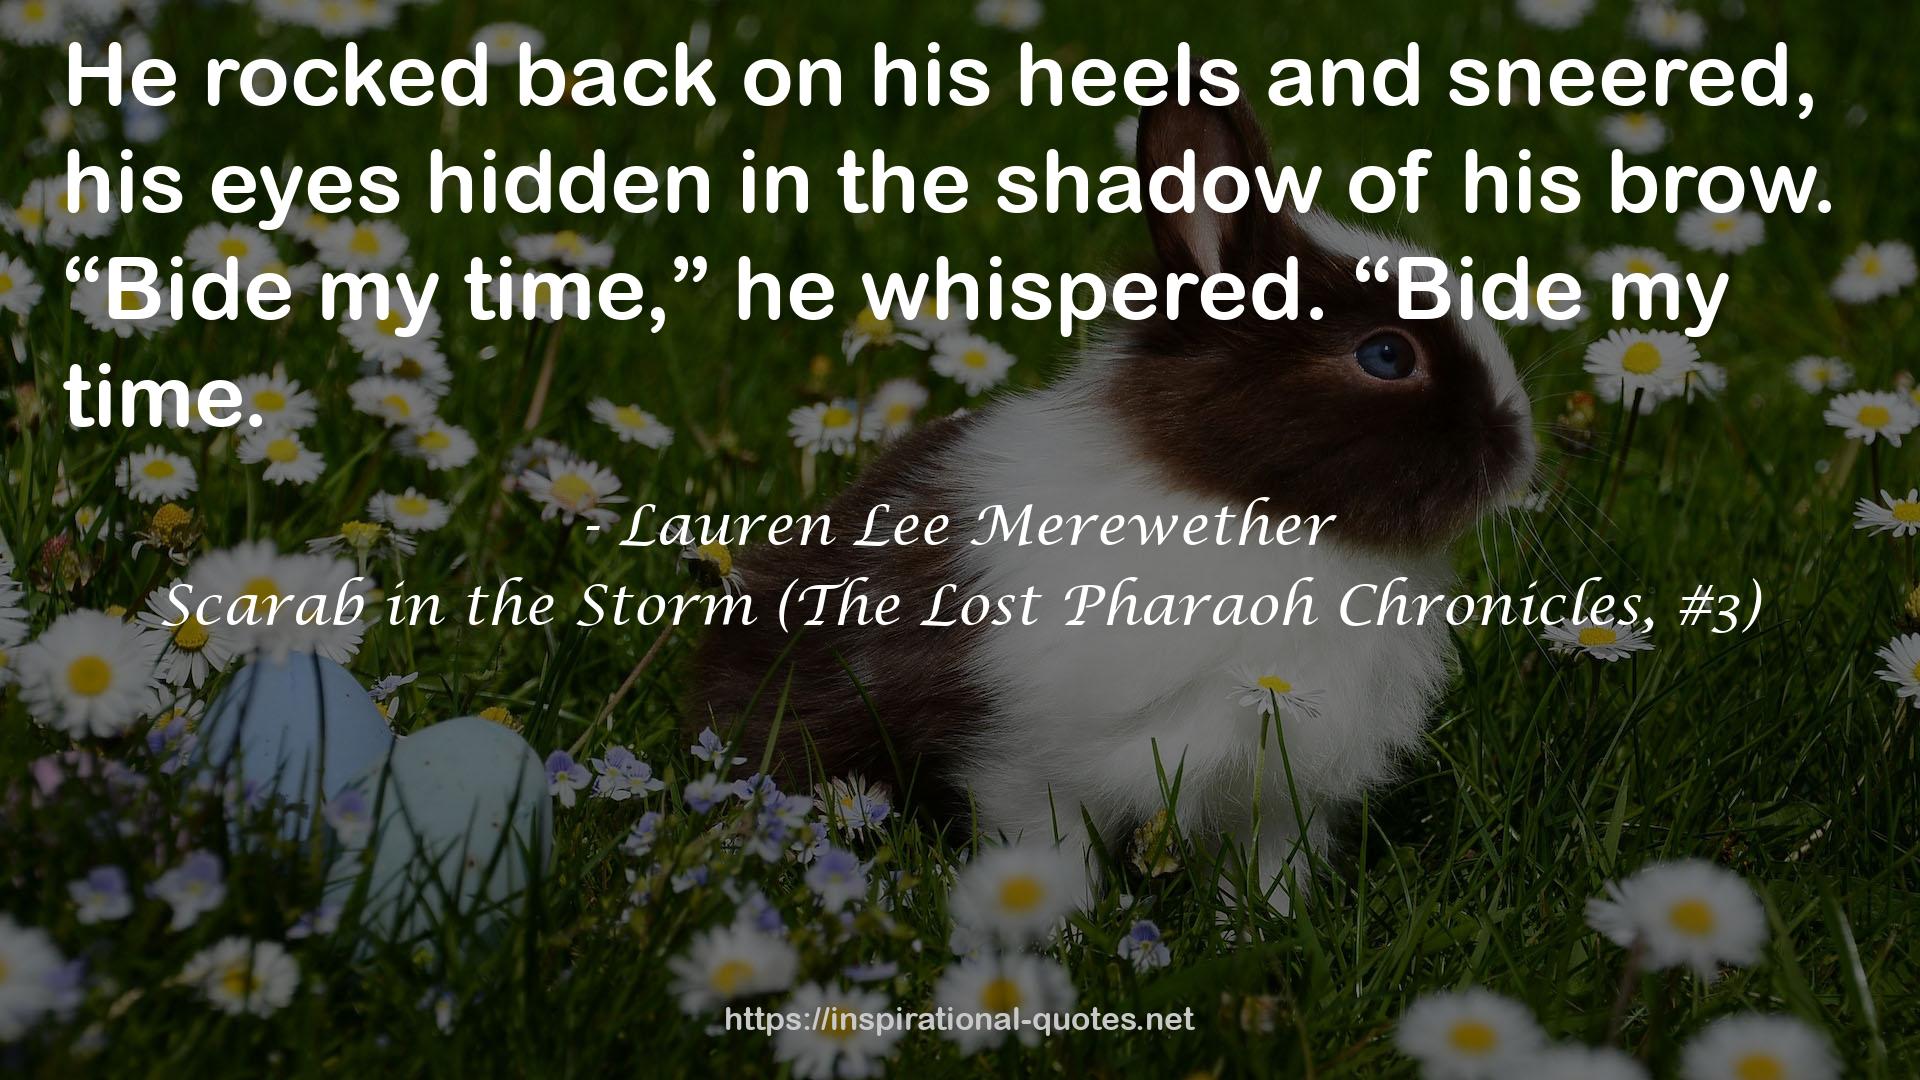 Scarab in the Storm (The Lost Pharaoh Chronicles, #3) QUOTES